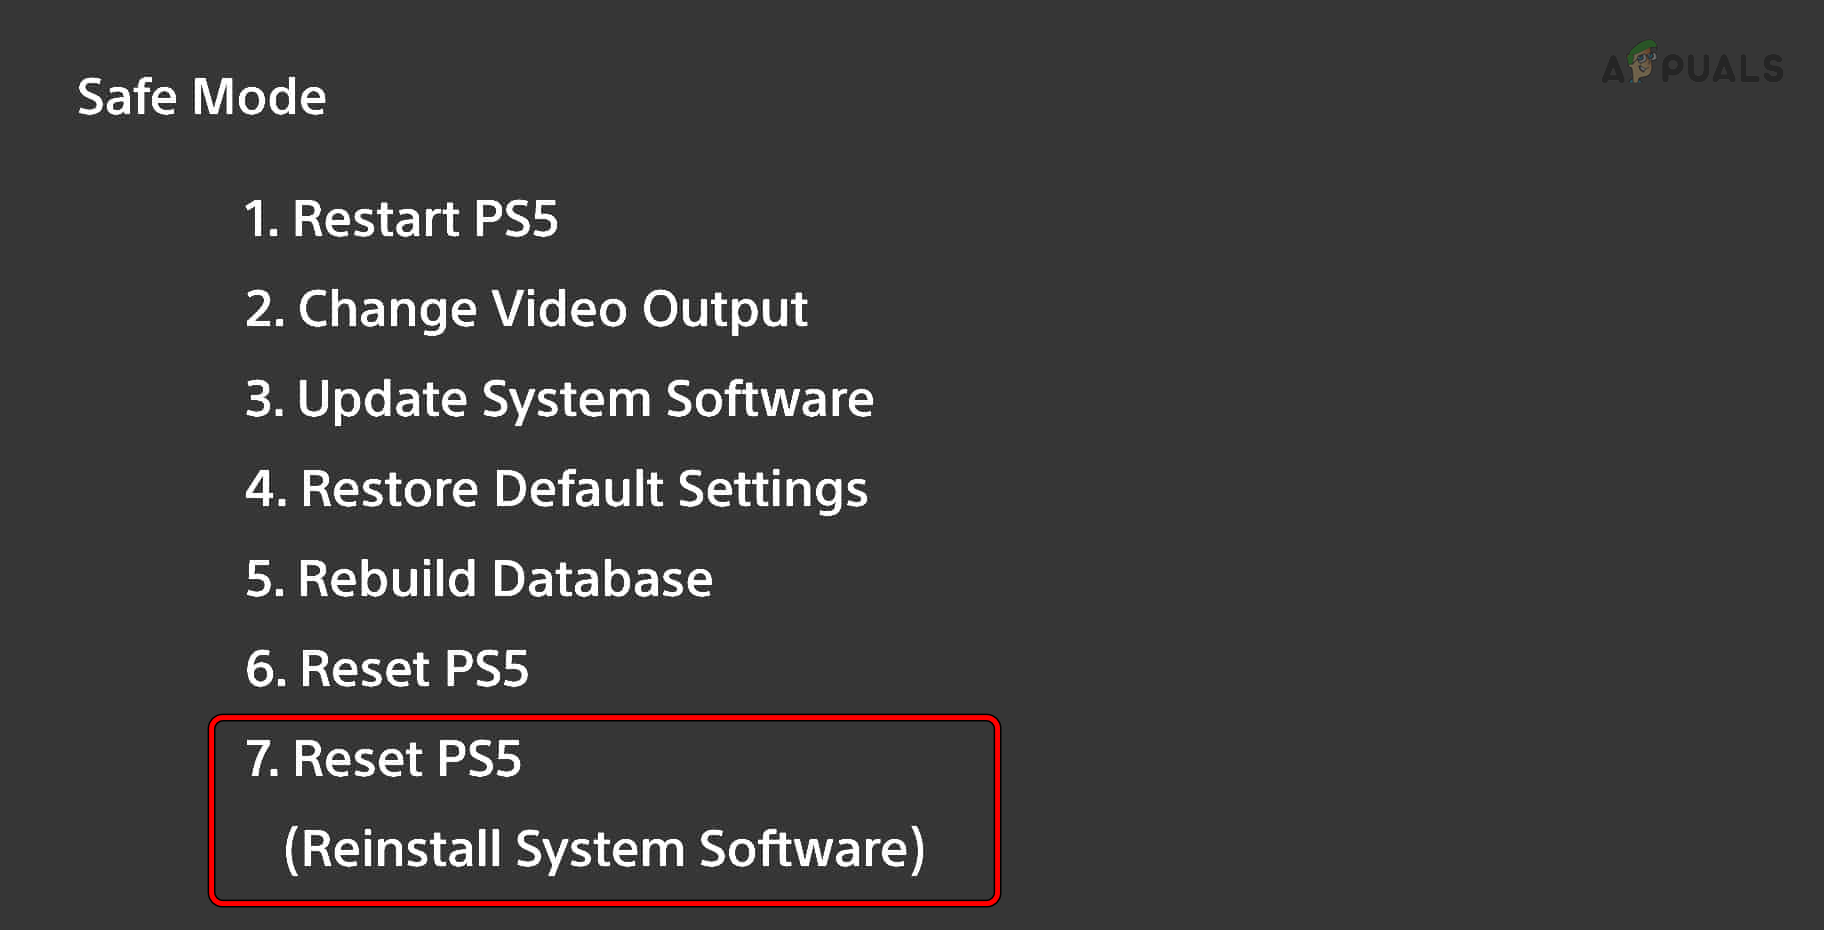 Reinstall System Software of the PS5